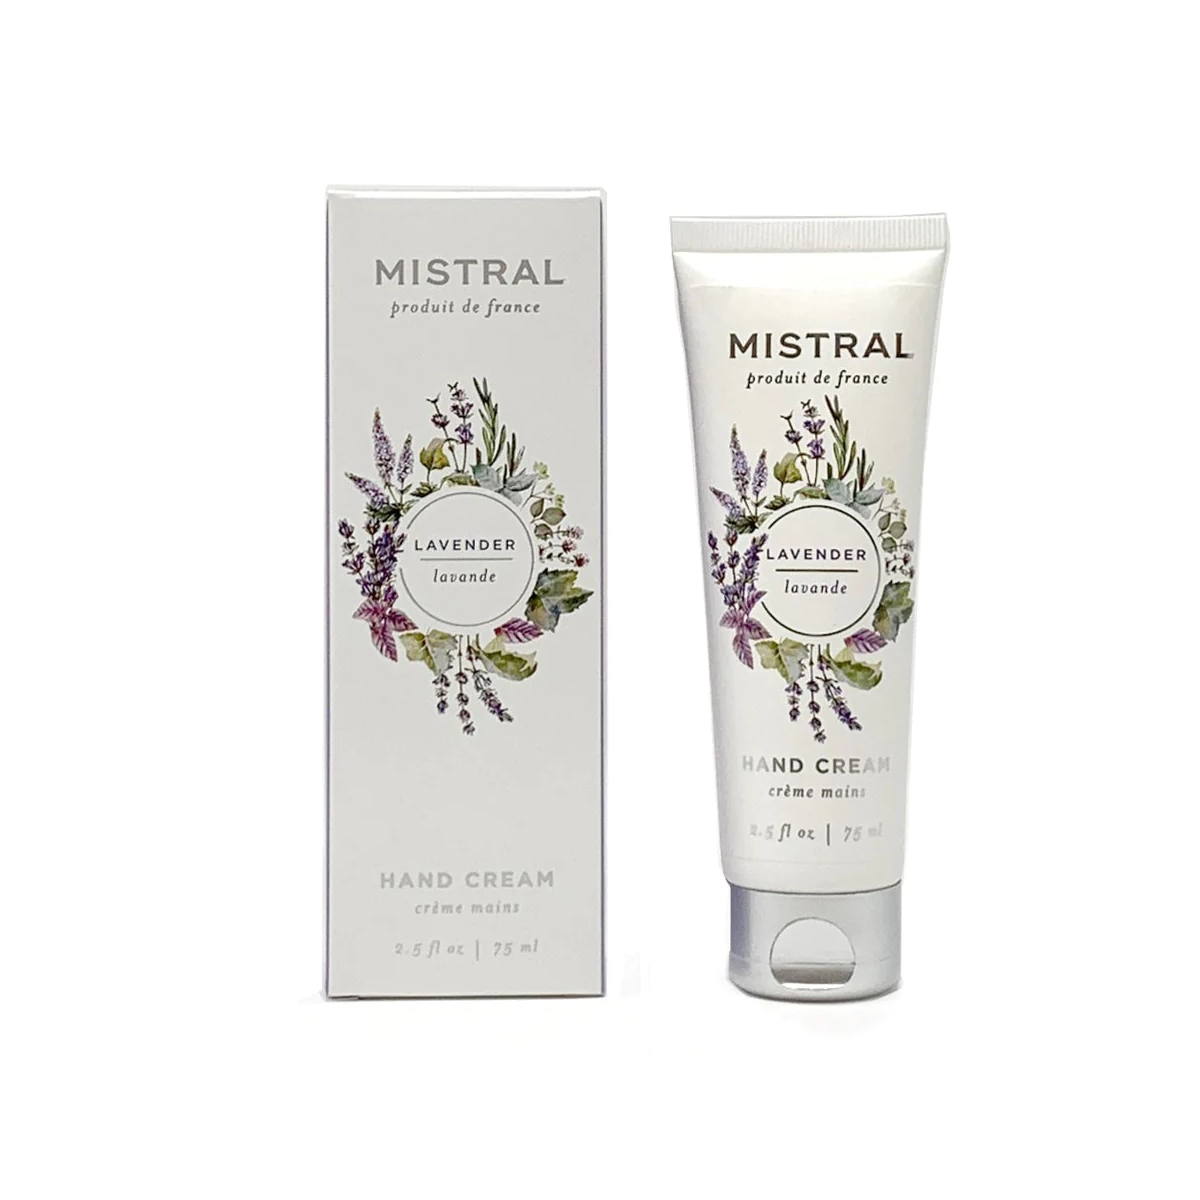 LAVENDER CLASSIC HAND CREAM by MISTRAL